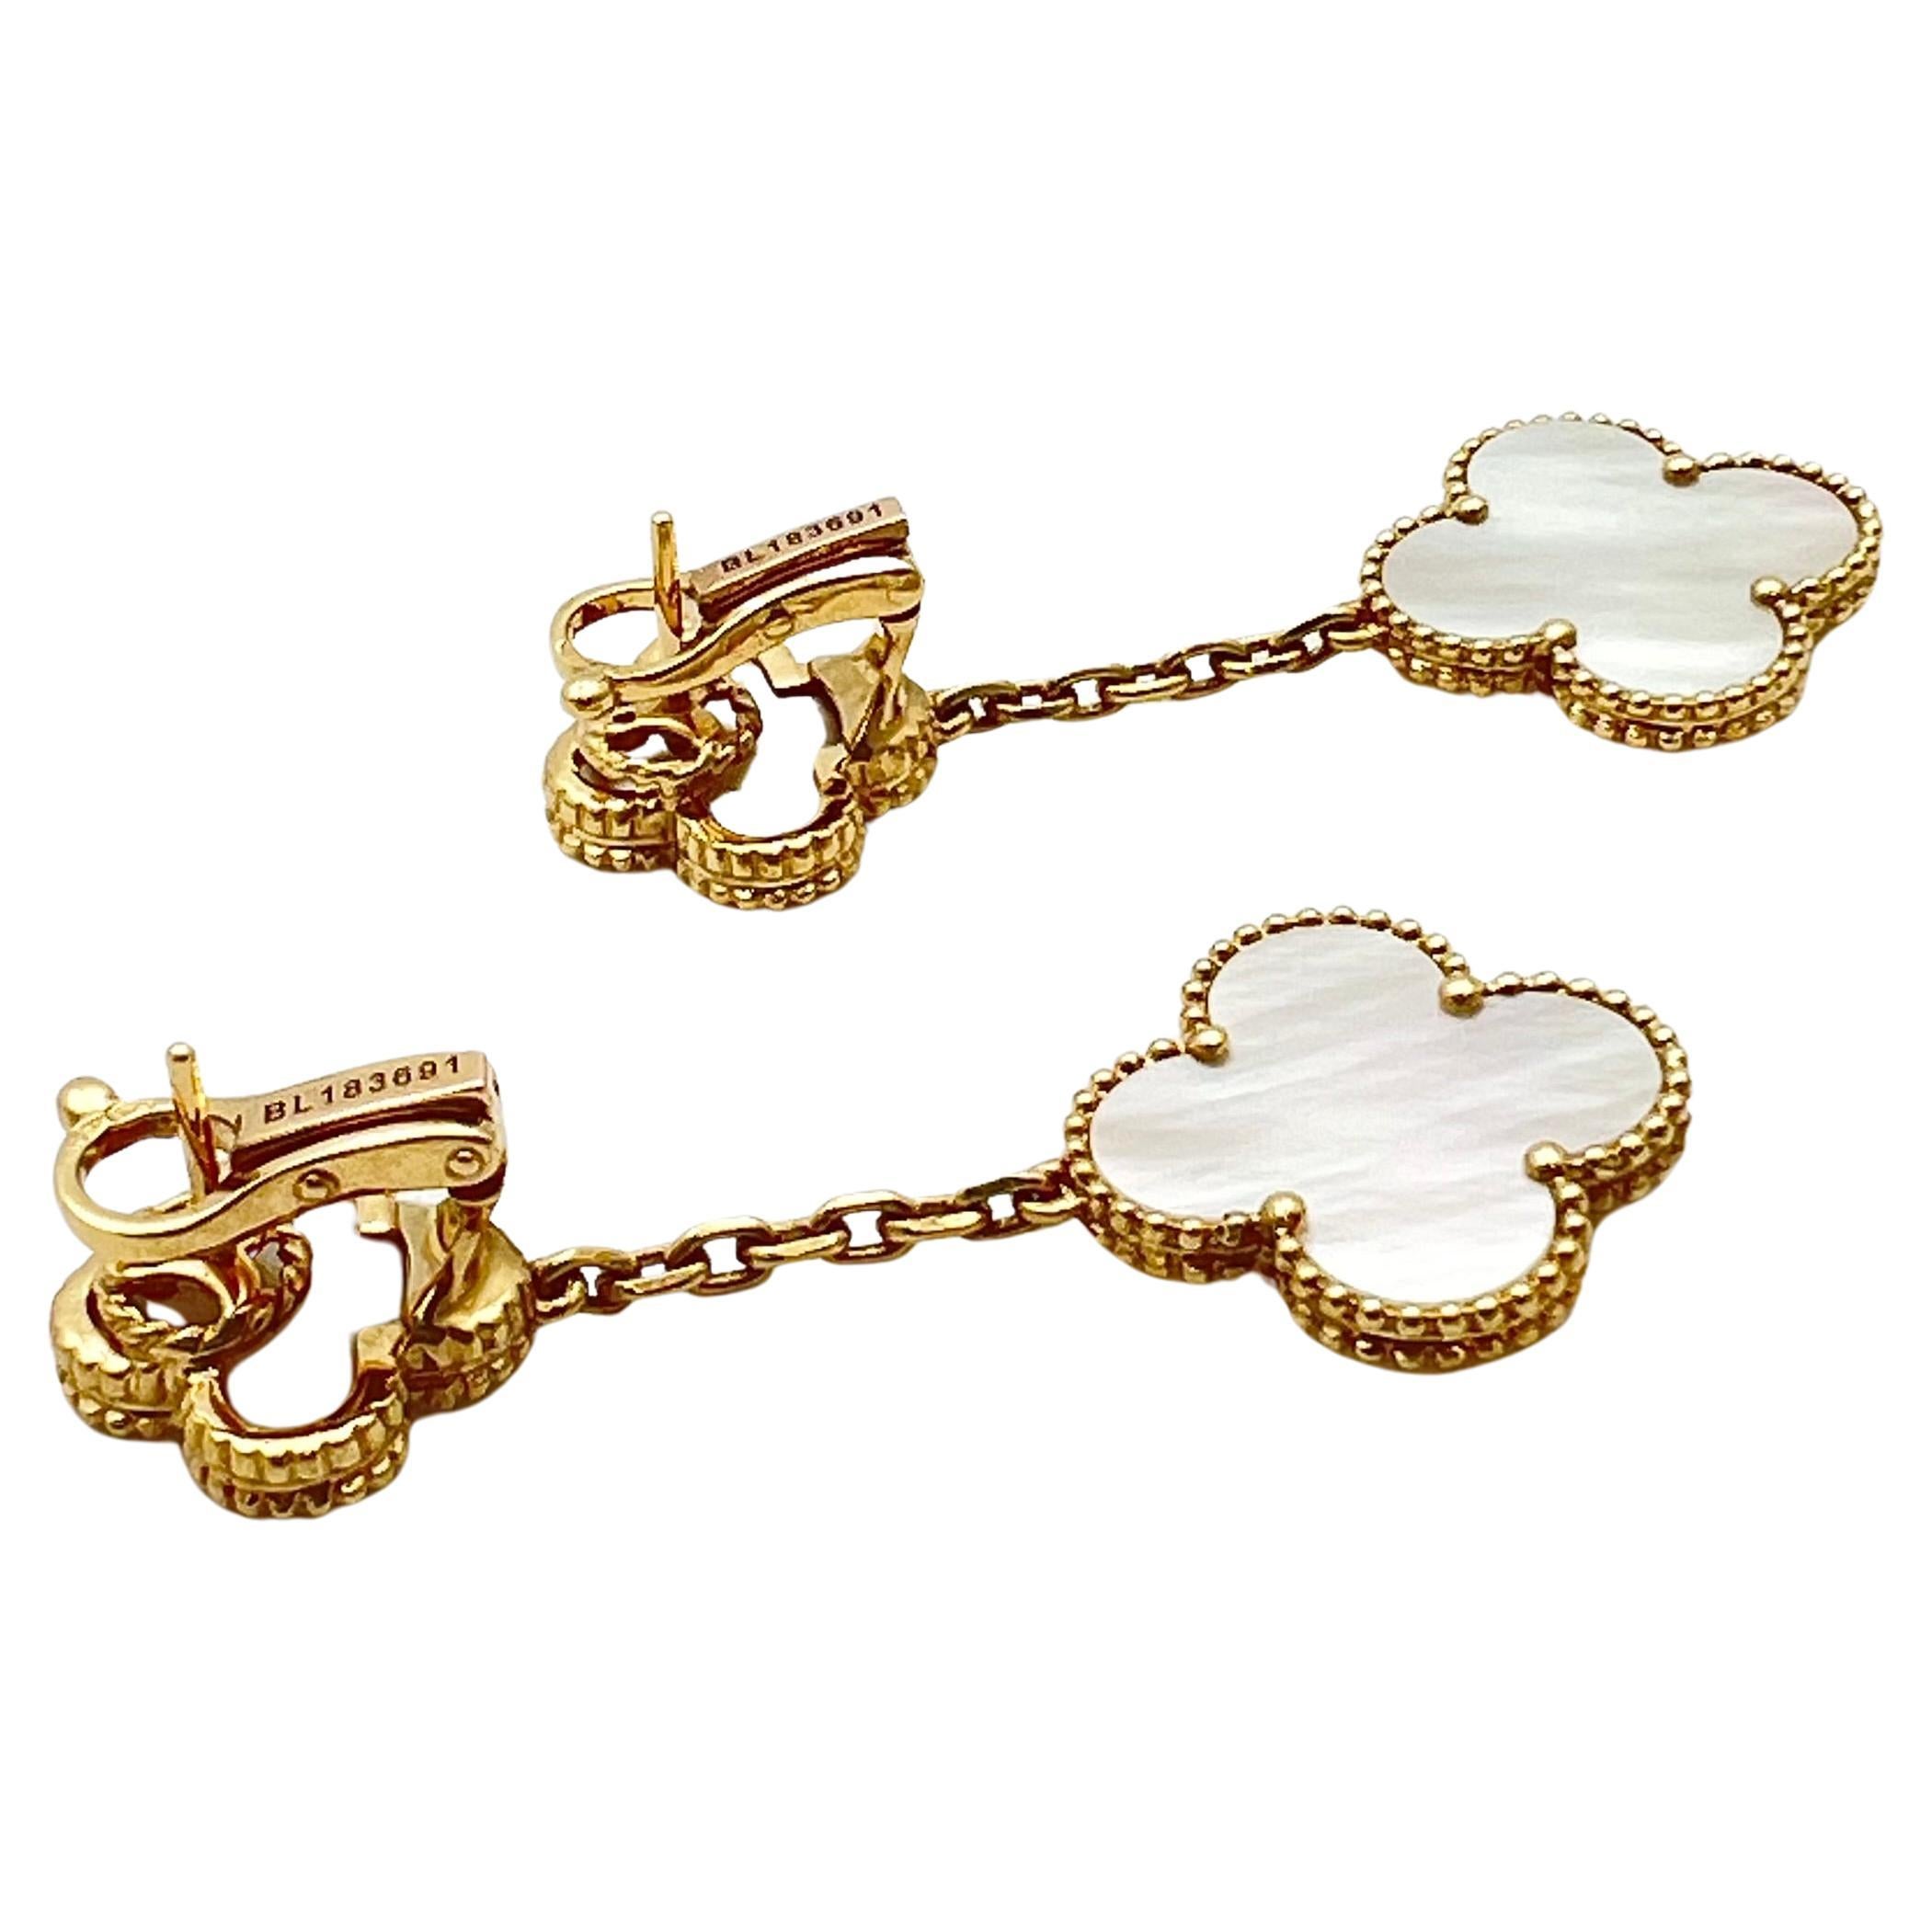 Van Cleef & Arpels Magic Alhambra drop earrings in 18k yellow gold, featuring a smaller mother-of-pearl clover-shaped motif at top and larger mother-of-pearl clover-shaped motif at bottom.  Clip backs with removable posts for pierced or unpierced